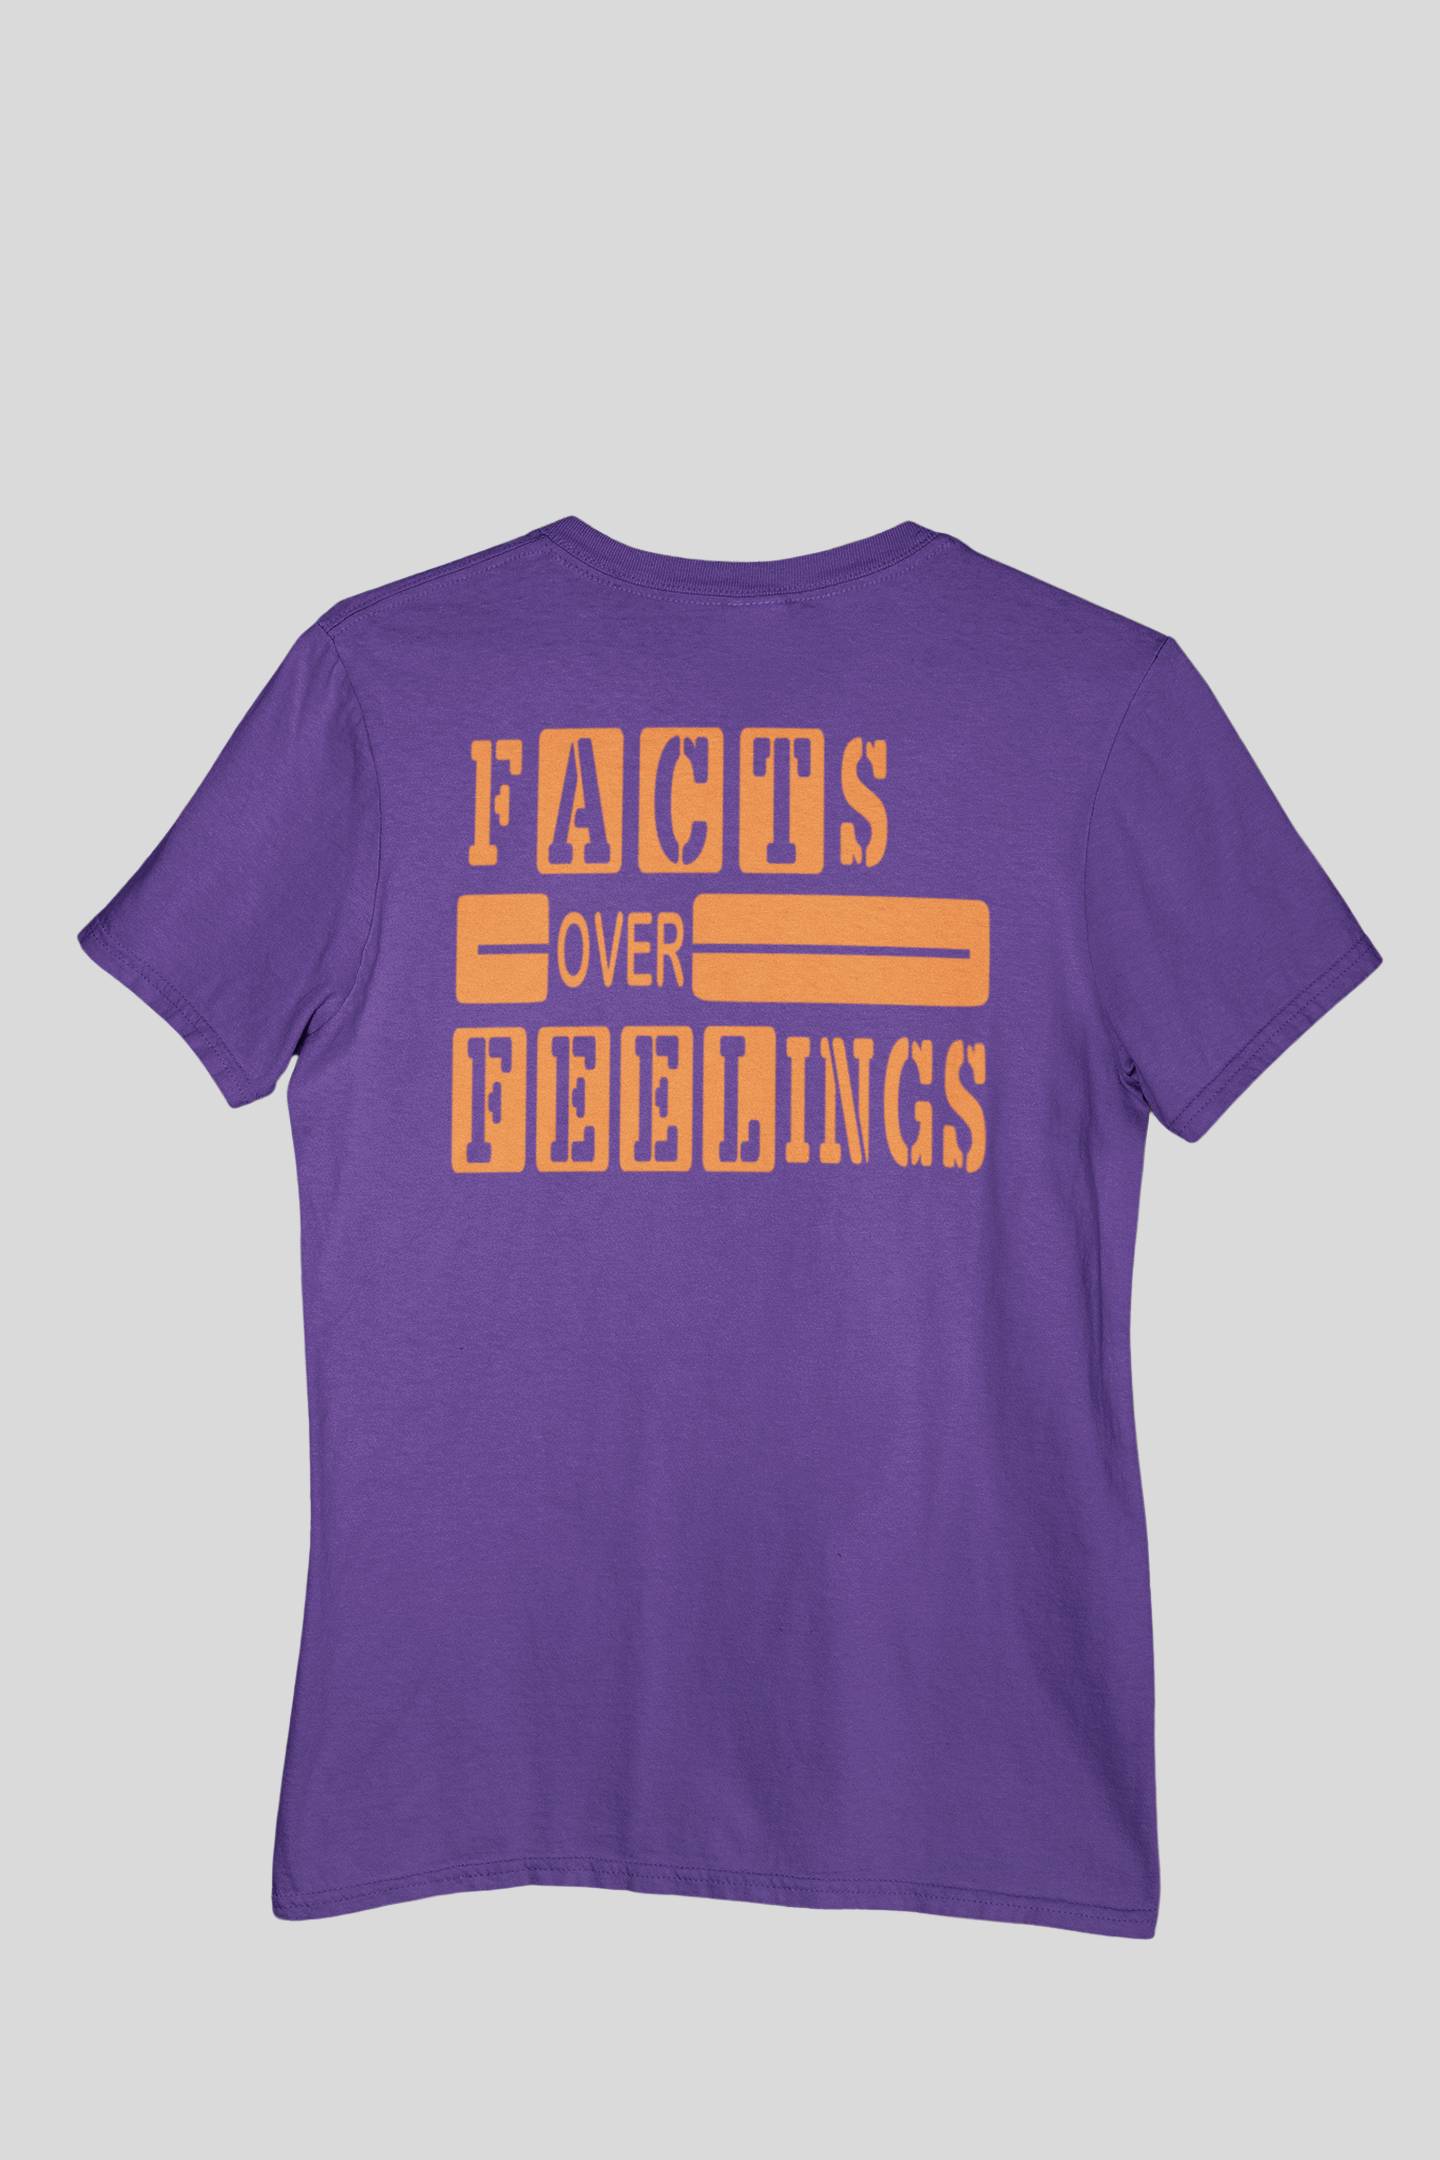 Facts Over Feelings Tee